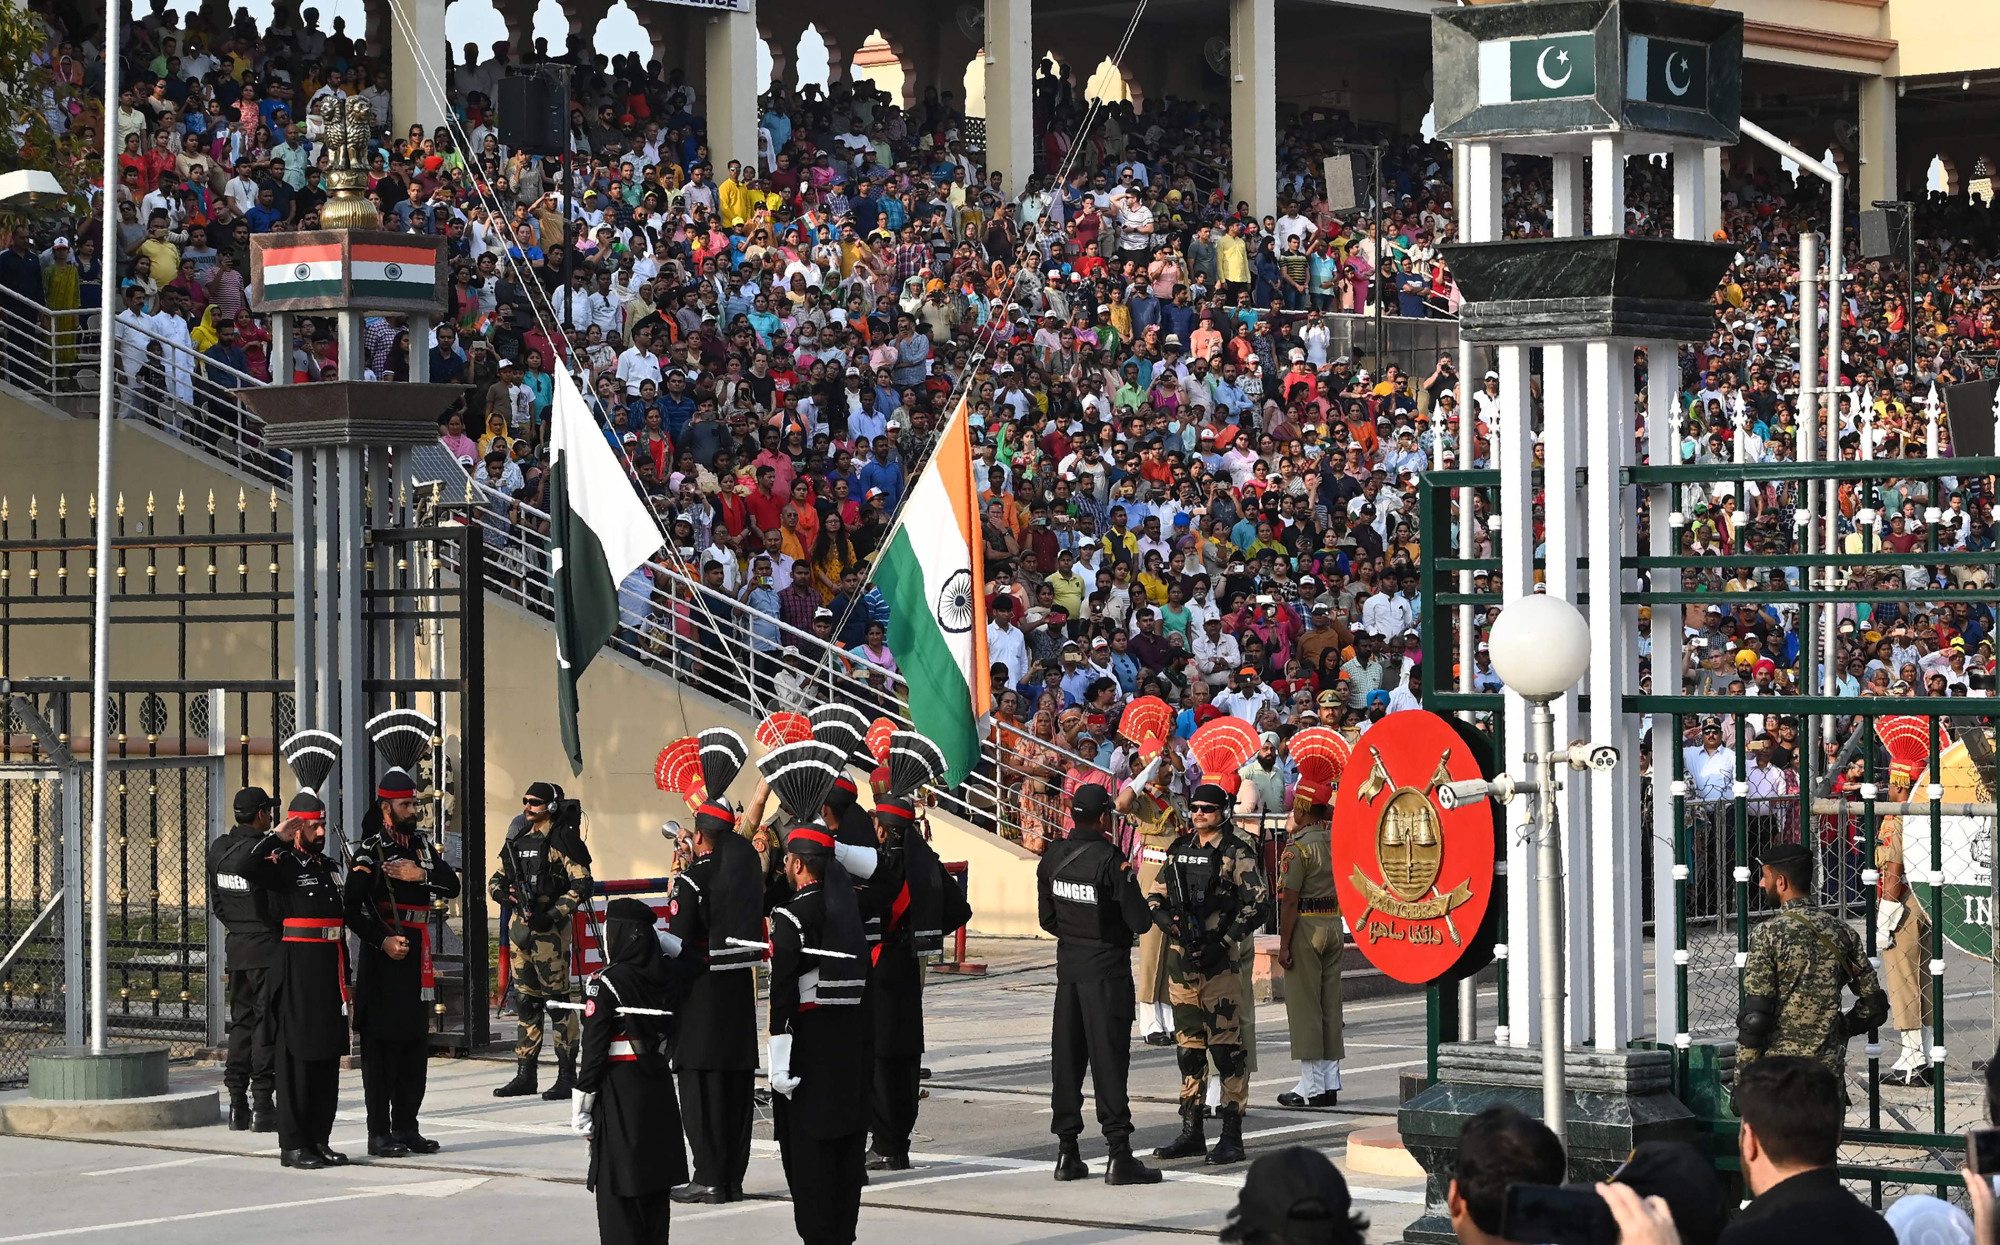 Pakistani Rangers (in black) and Indian Border Security Force personnel perform a flag-lowering ceremony at the Wagah border area between Pakistan and India on Saturday. | AFP-JIJI